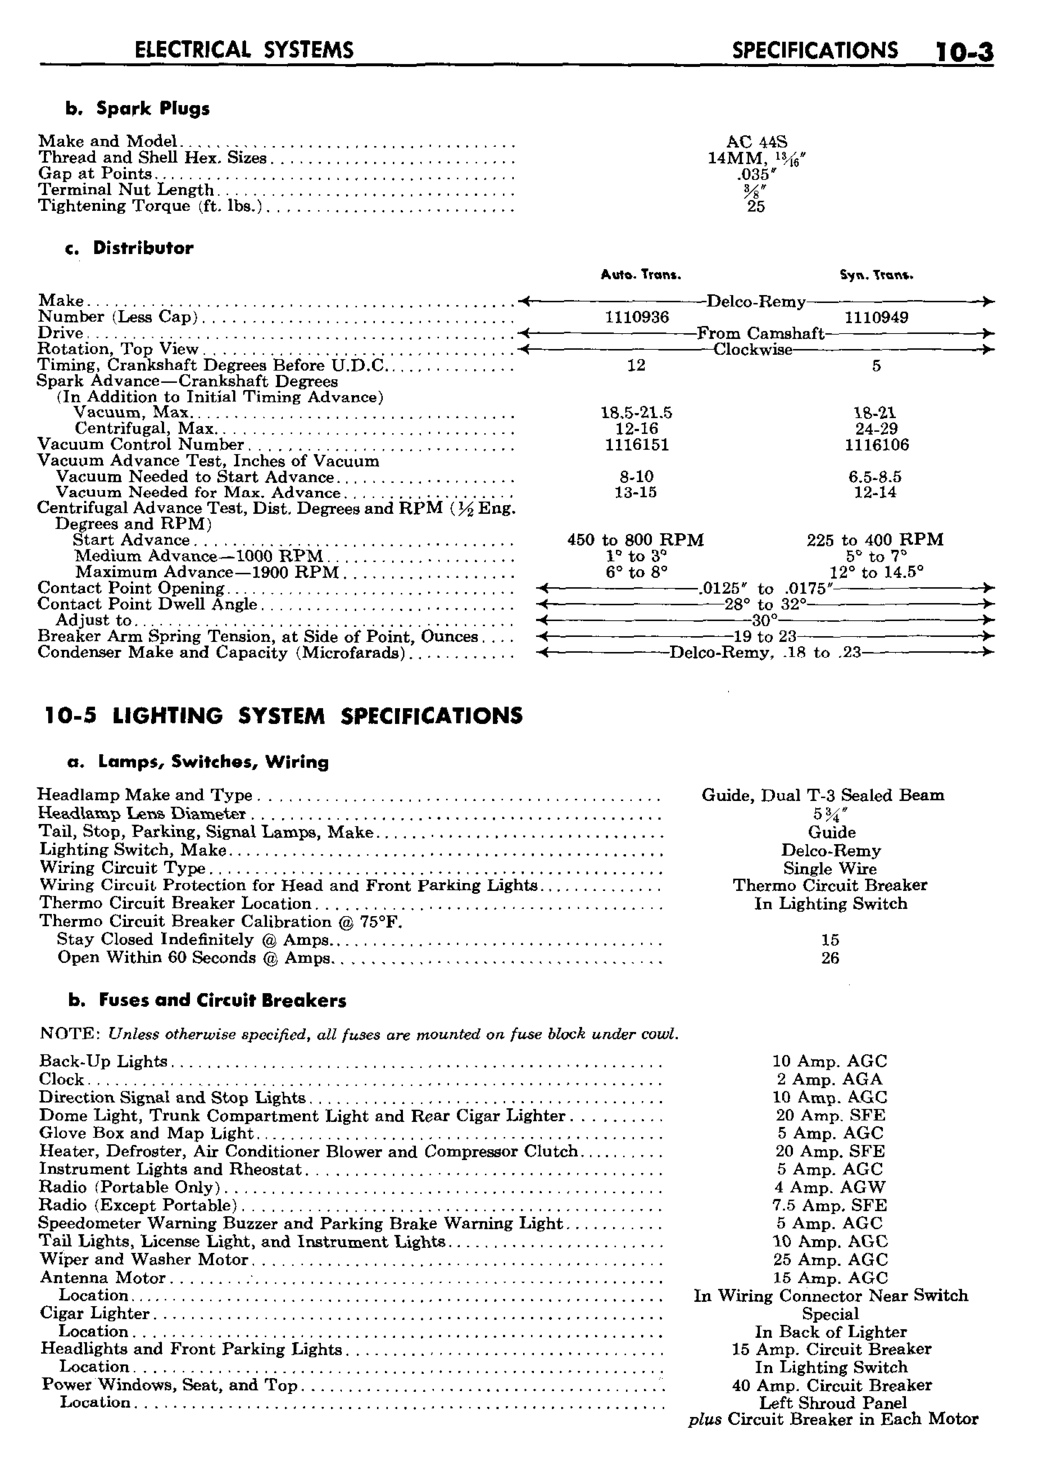 n_11 1959 Buick Shop Manual - Electrical Systems-003-003.jpg